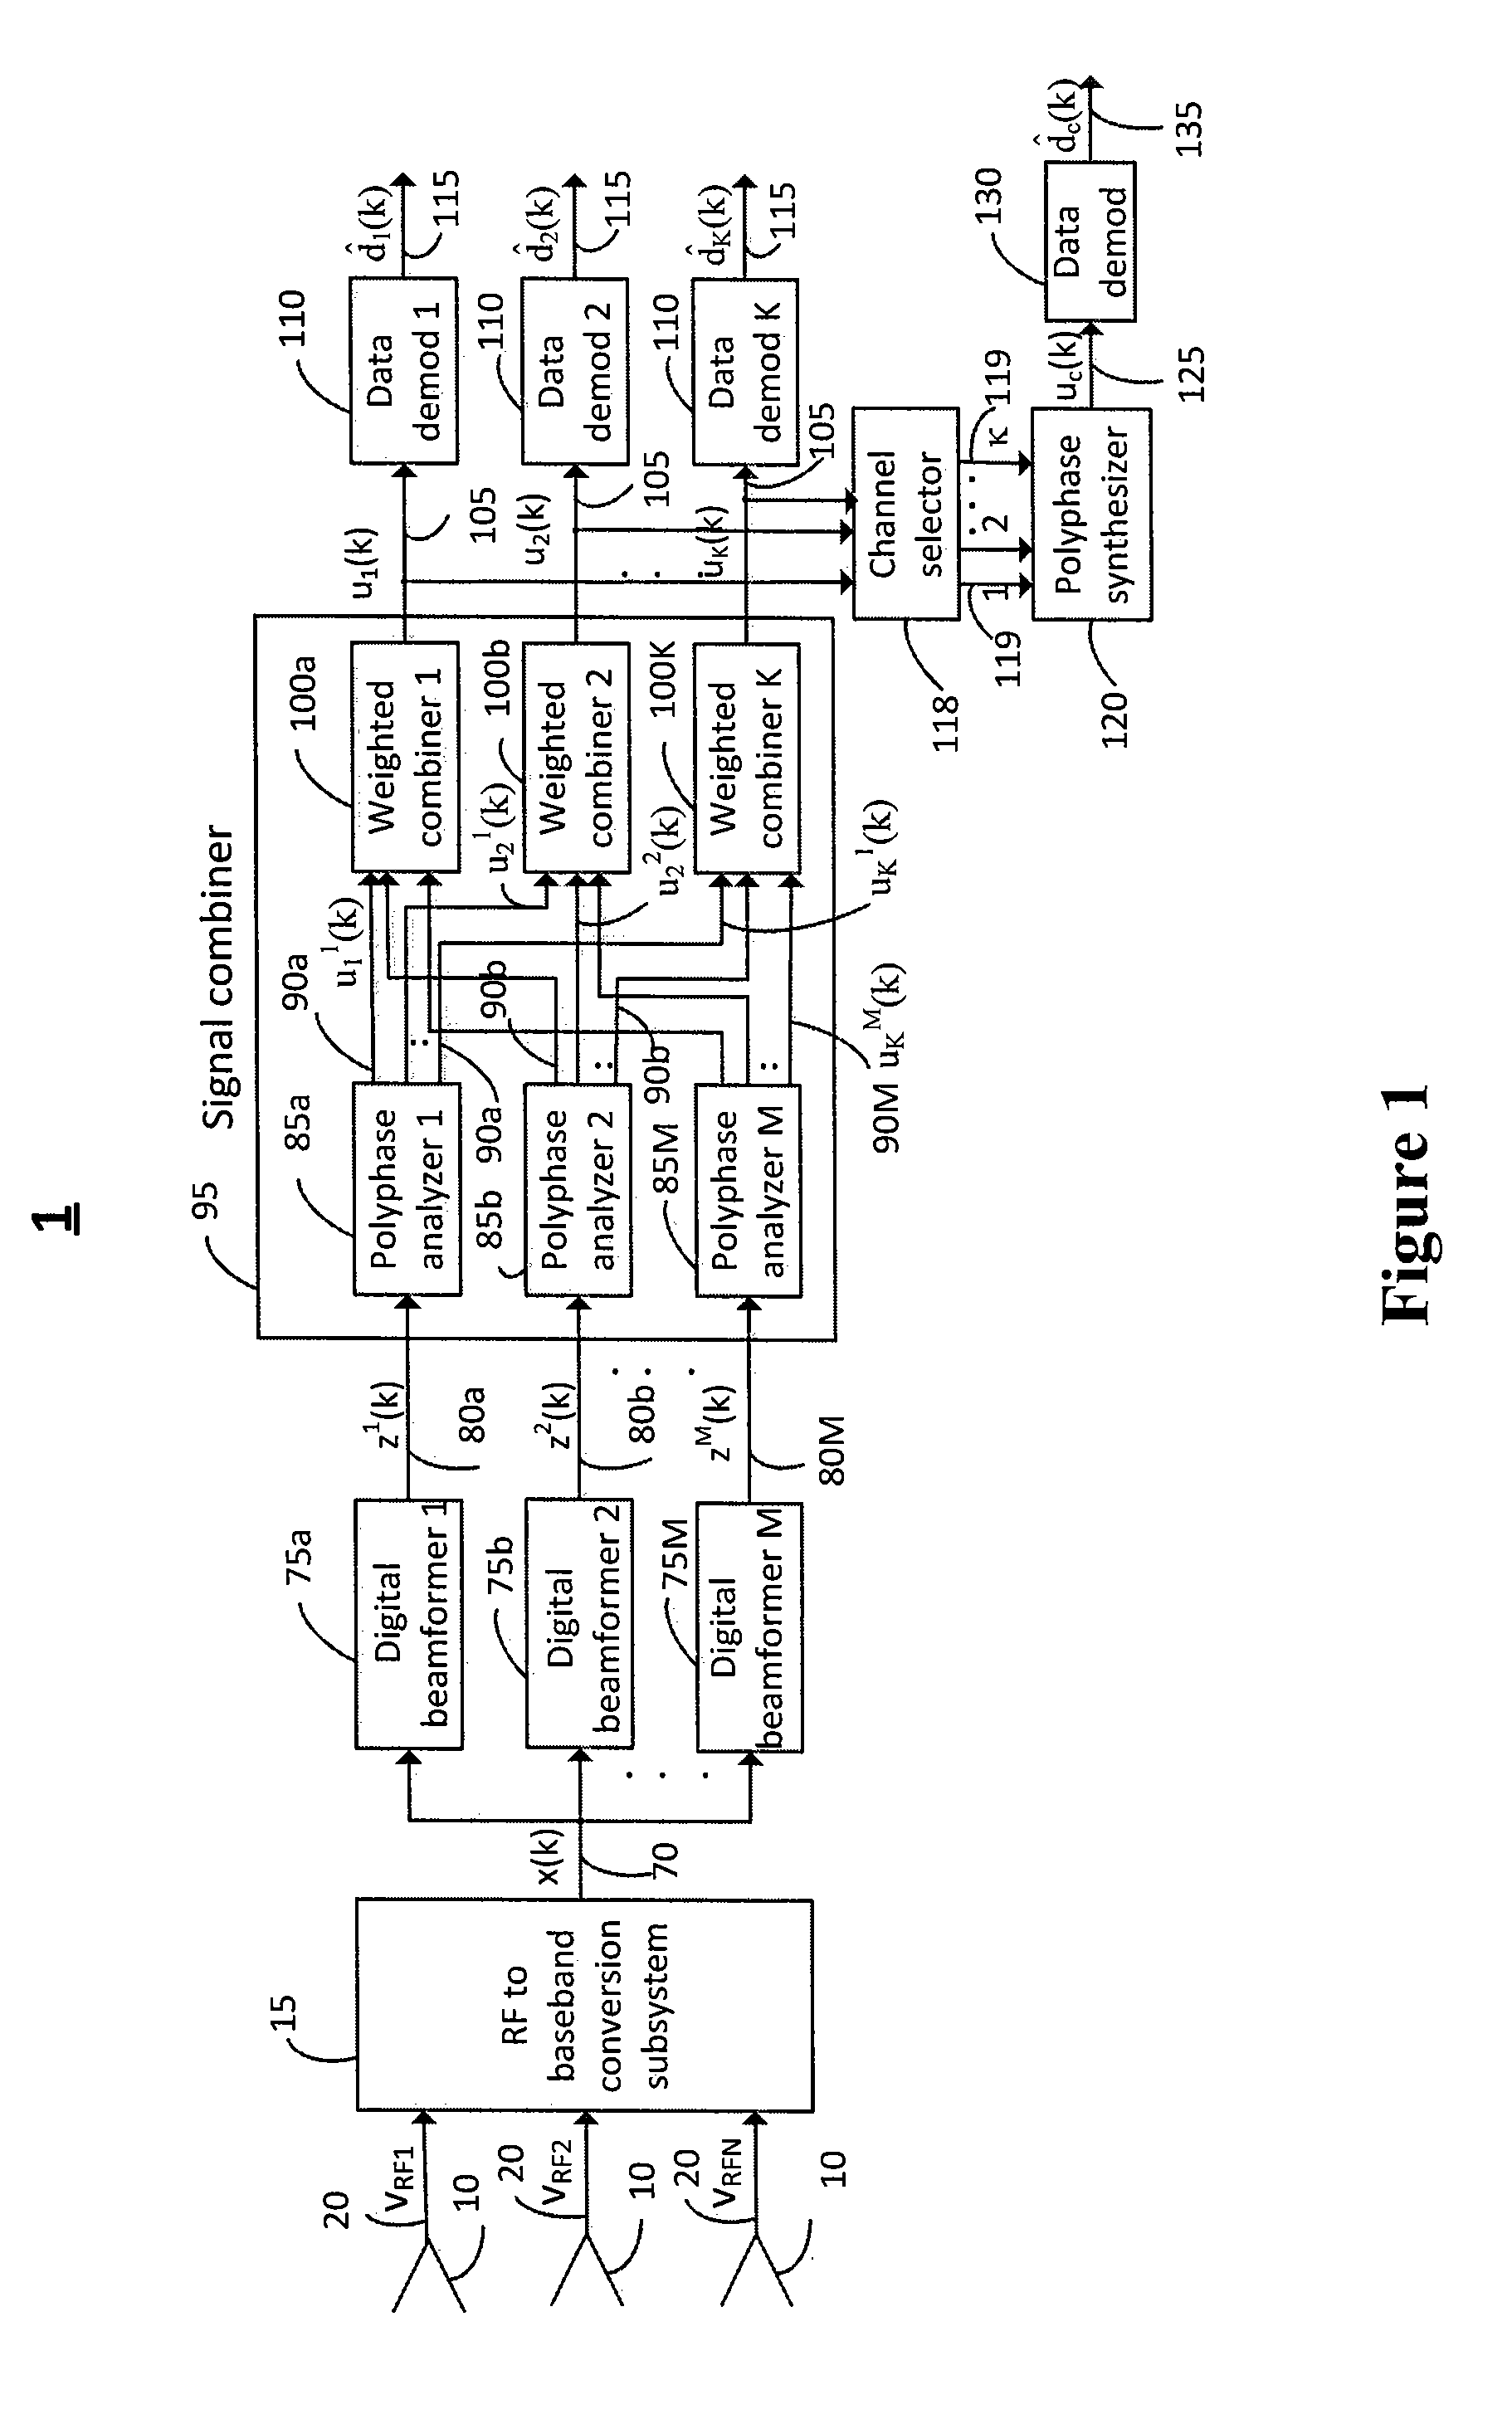 Systems and methods for multi-beam antenna architectures for adaptive nulling of interference signals